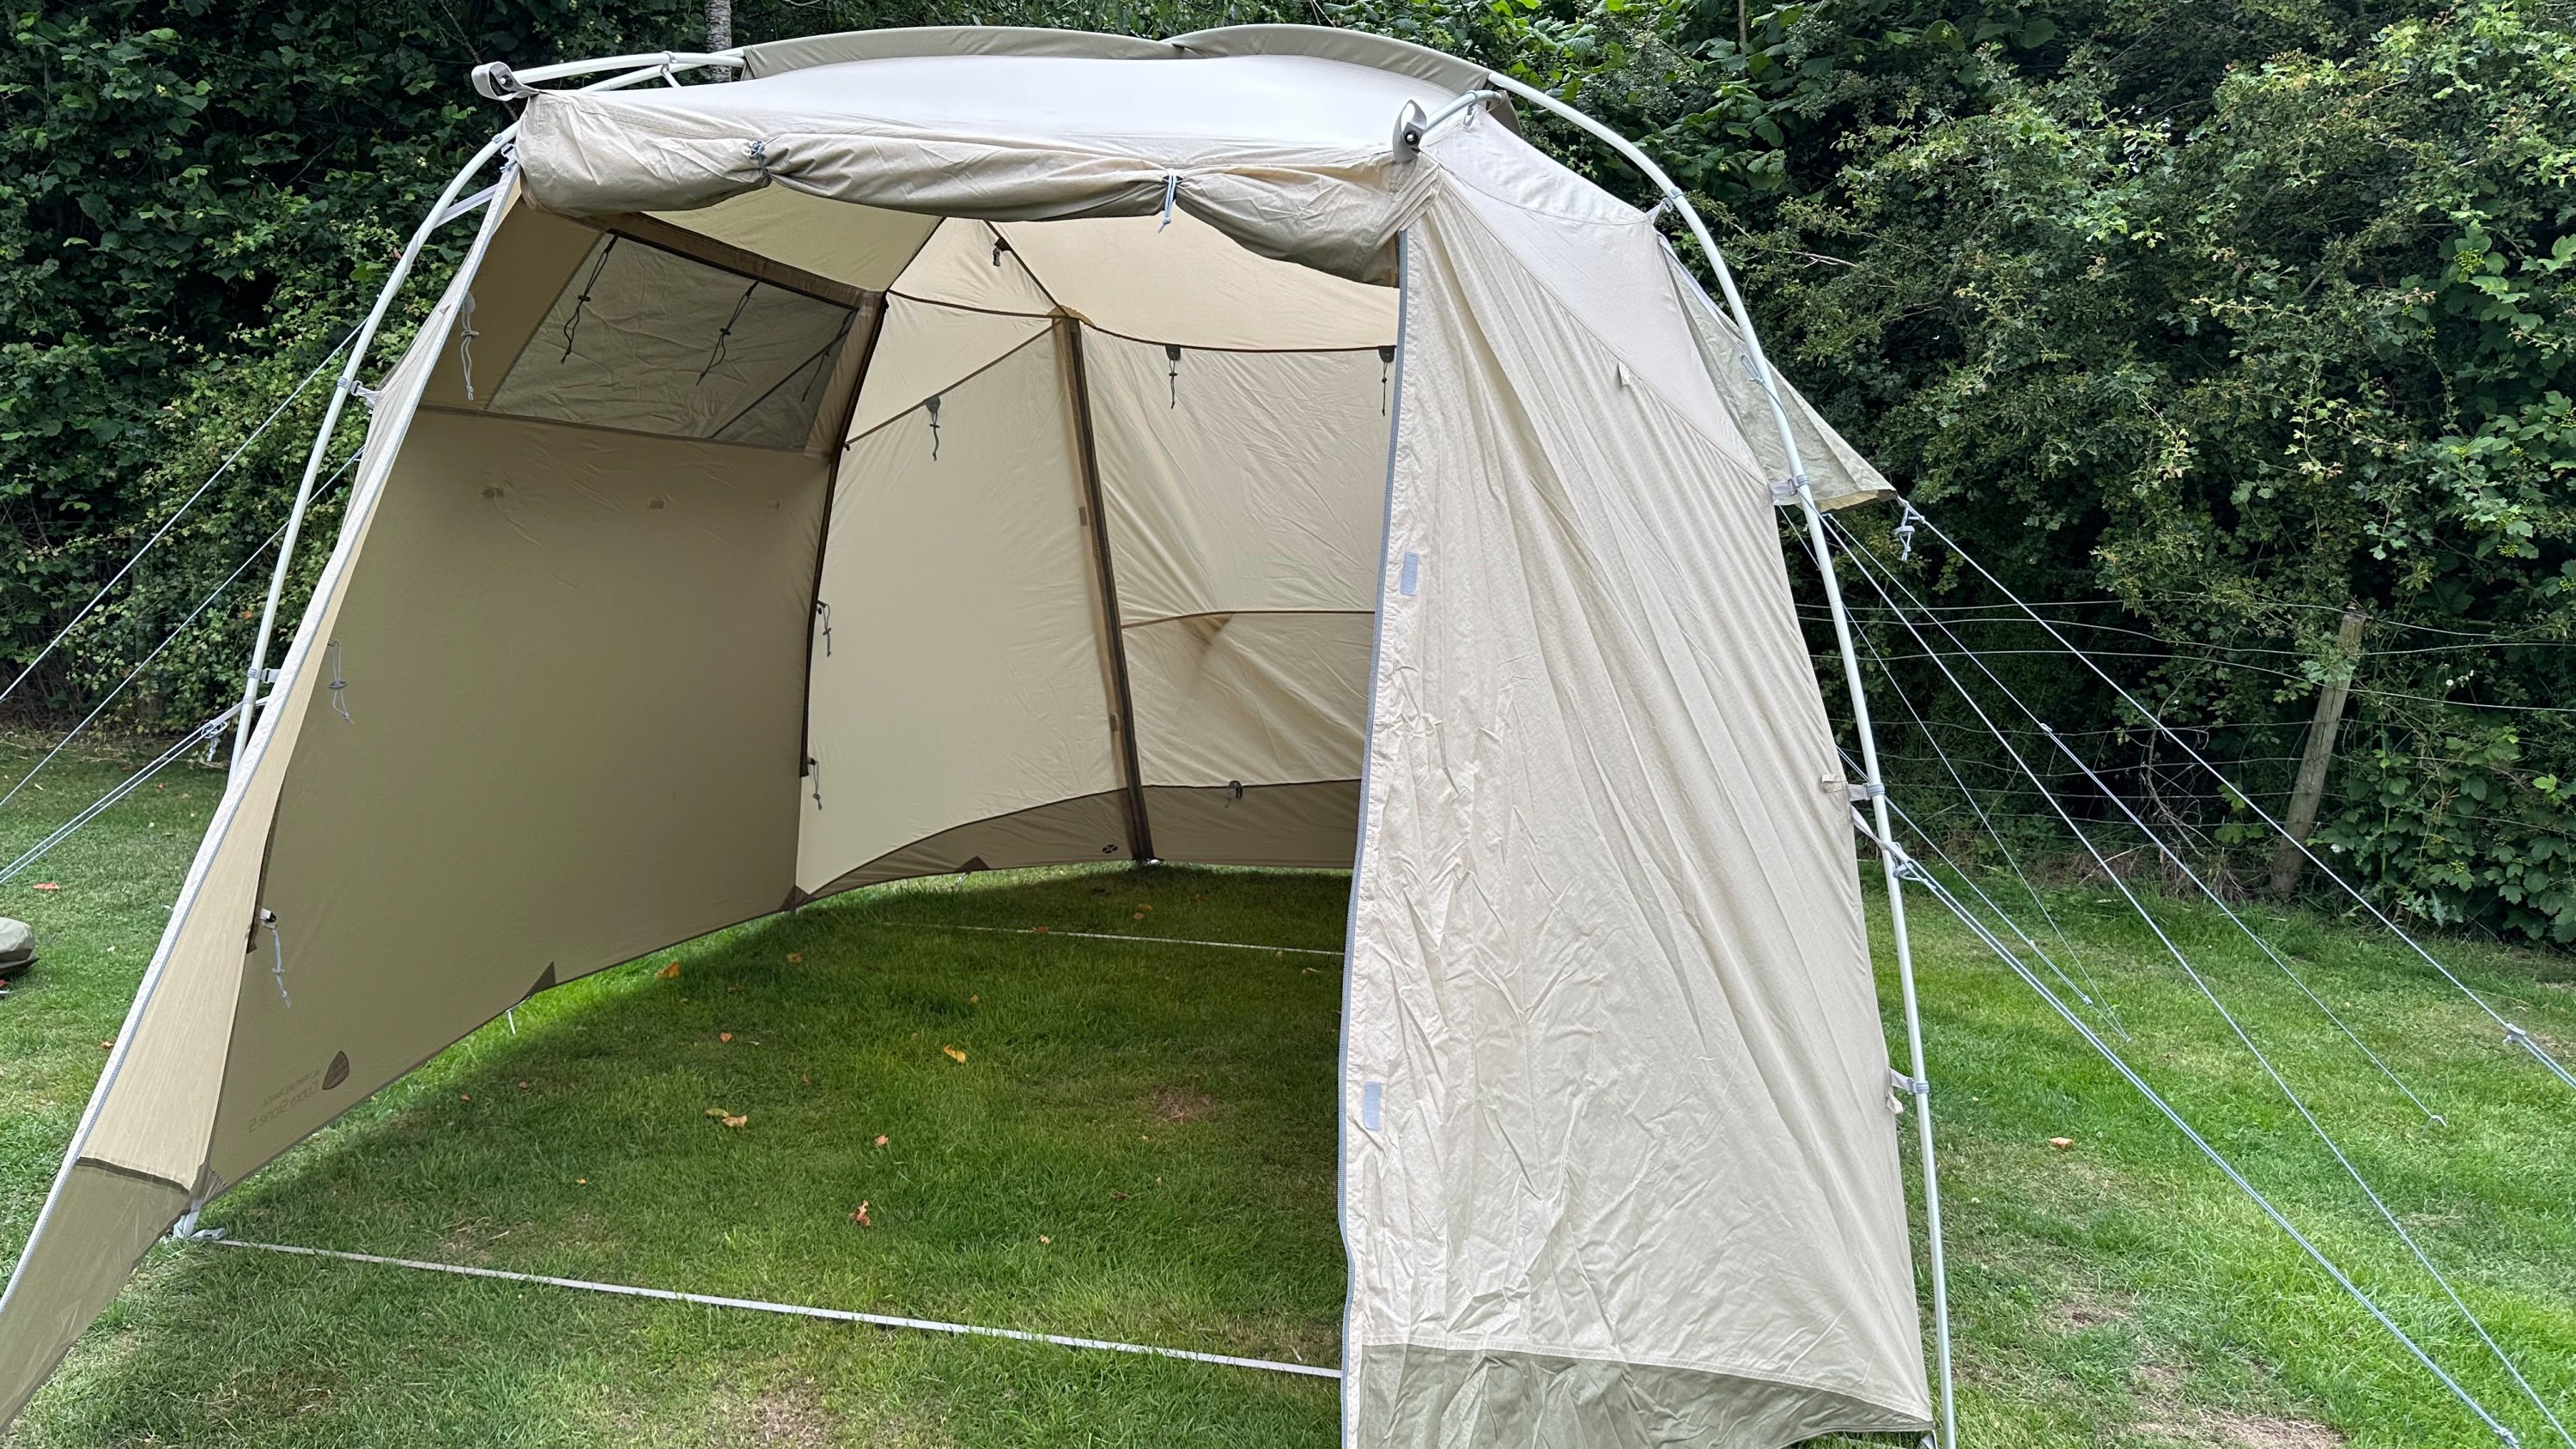 The tent pitched without the inner tent